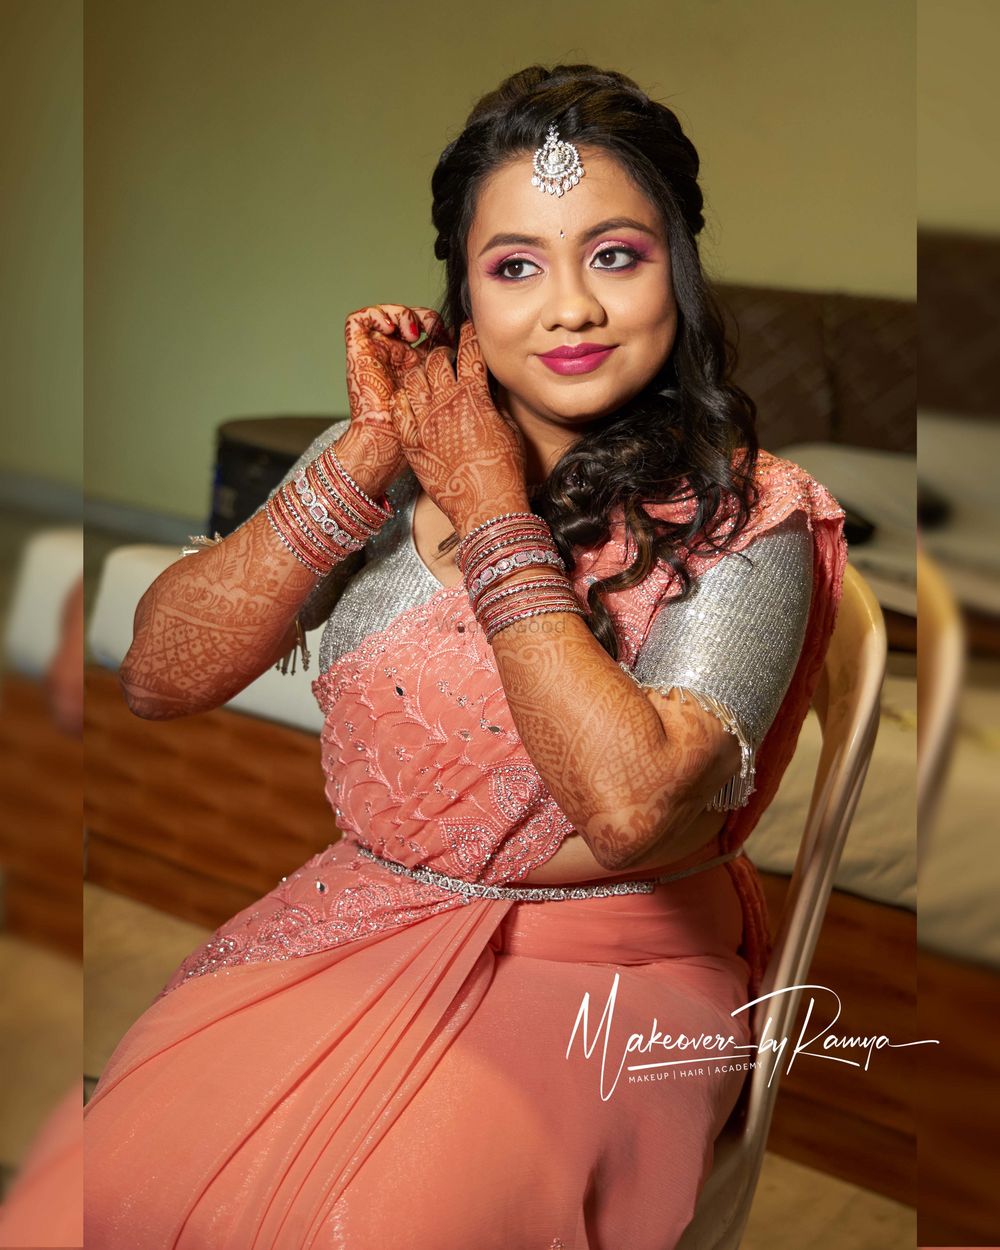 Photo By Makeovers by Ramya - Bridal Makeup